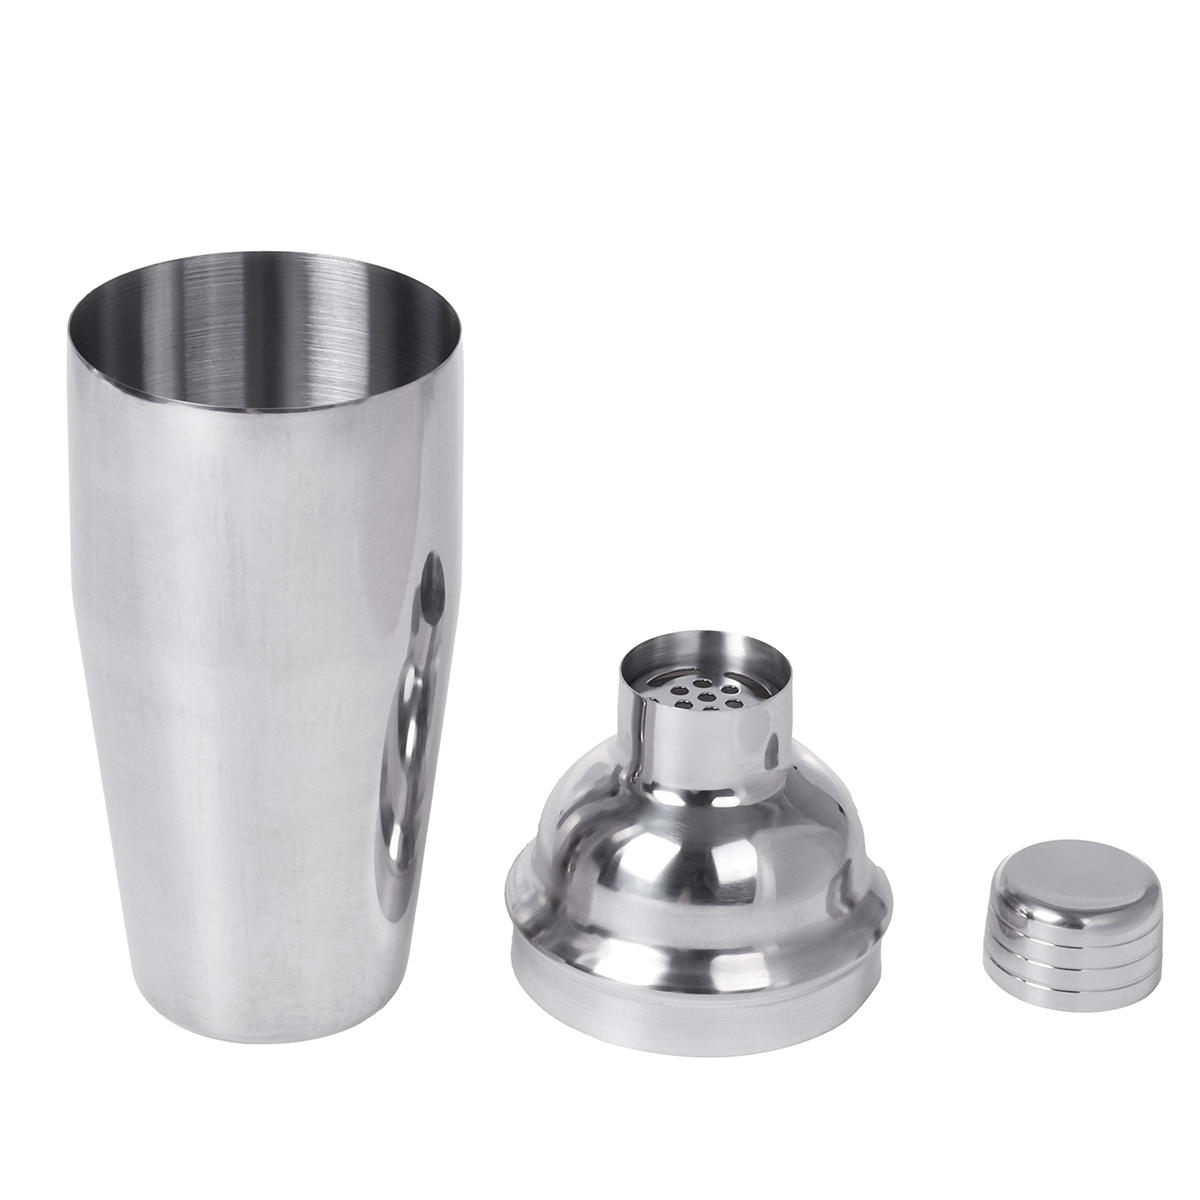 20PCS-750ml-Stainless-Steel-Cocktail-Shaker-Cocktail-Shaker-Drink-Set-Cocktail-Shaker-1719706-7